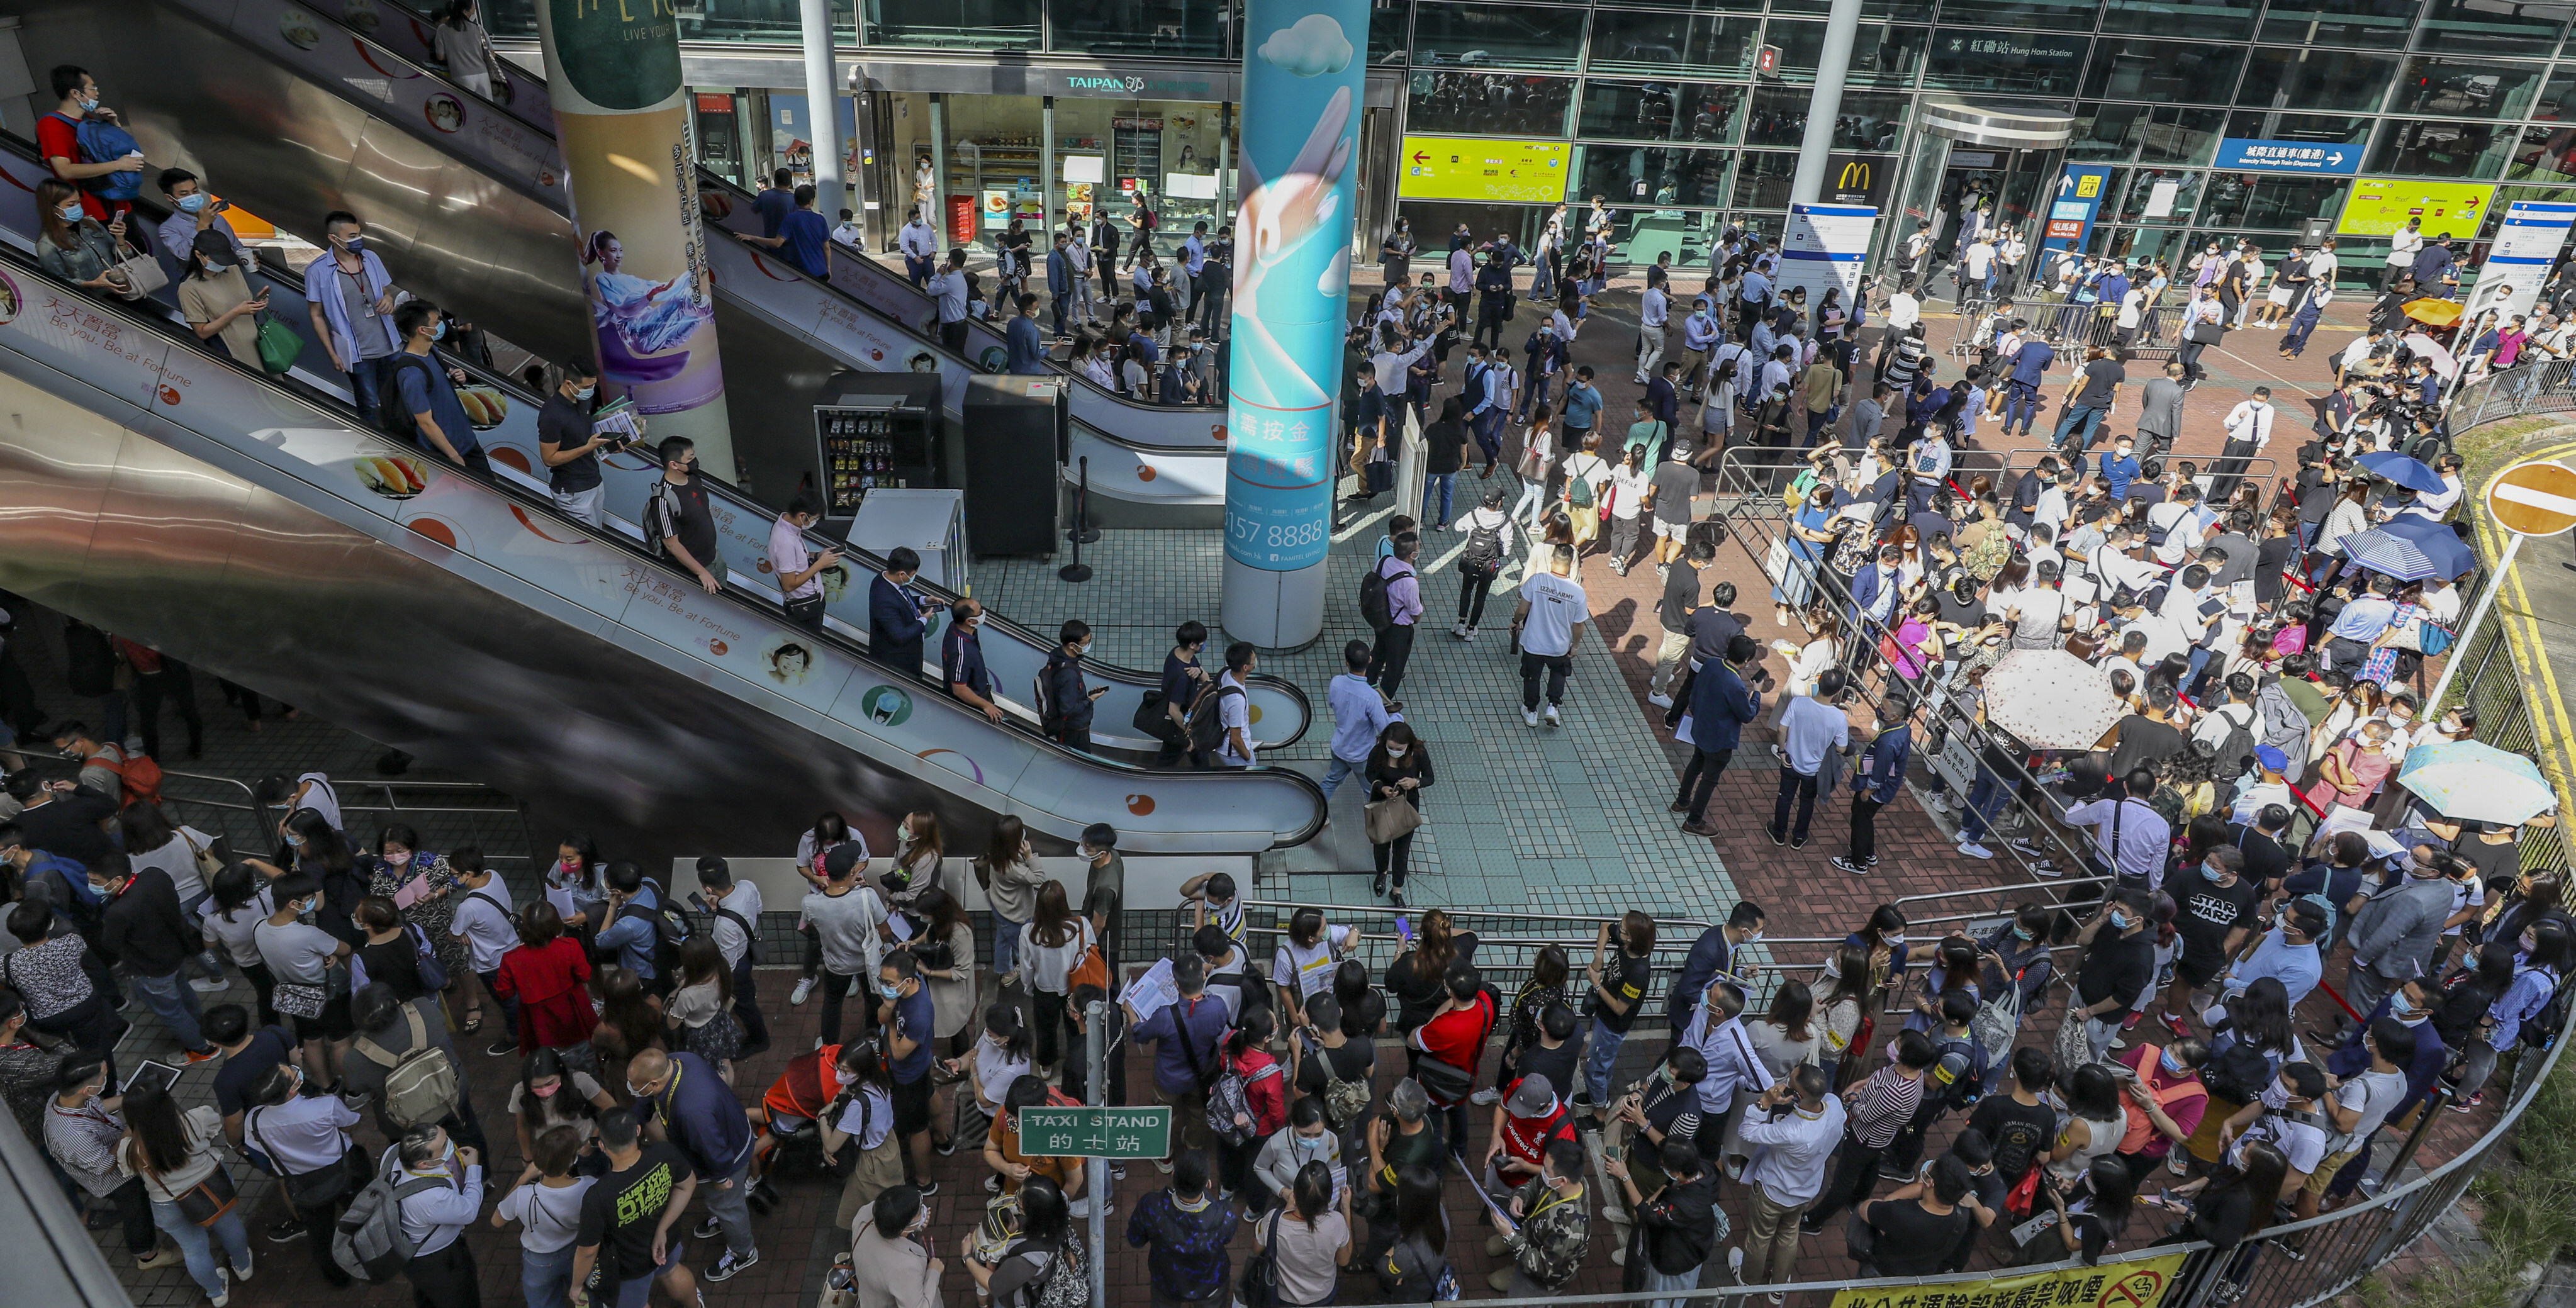 A sell-out crowd turned up for the #Lyos apartments in Hung Shui Kiu at CK Asset Holdings’ sales office in Hung Hom on 6 November 2021, where 36 buyers competed for every available unit. Photo: Xiaomei Chen